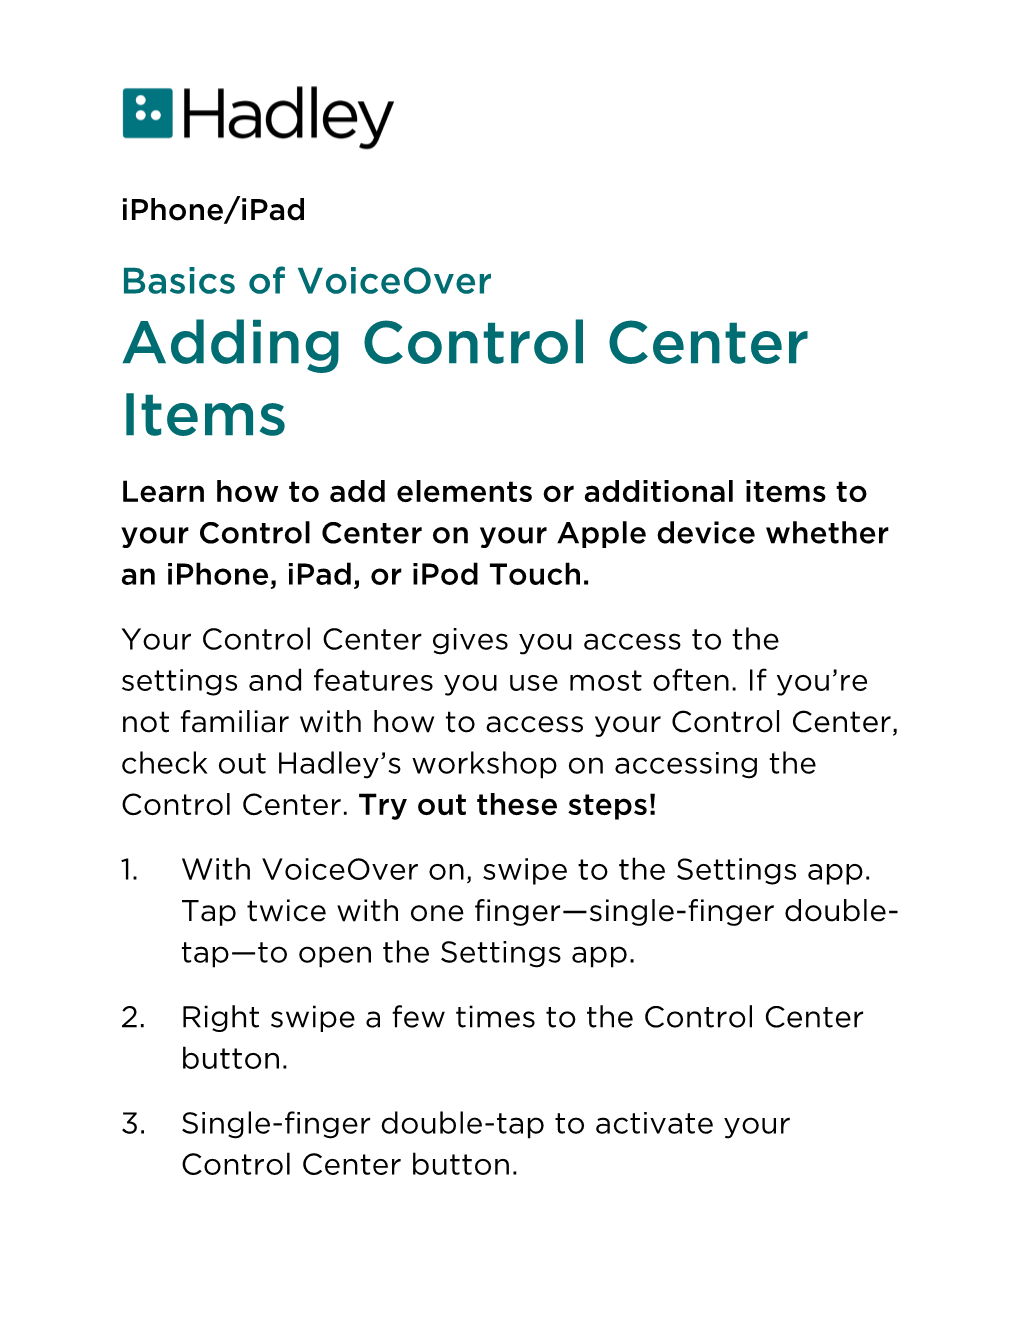 Adding Control Center Items Learn How to Add Elements Or Additional Items to Your Control Center on Your Apple Device Whether an Iphone, Ipad, Or Ipod Touch